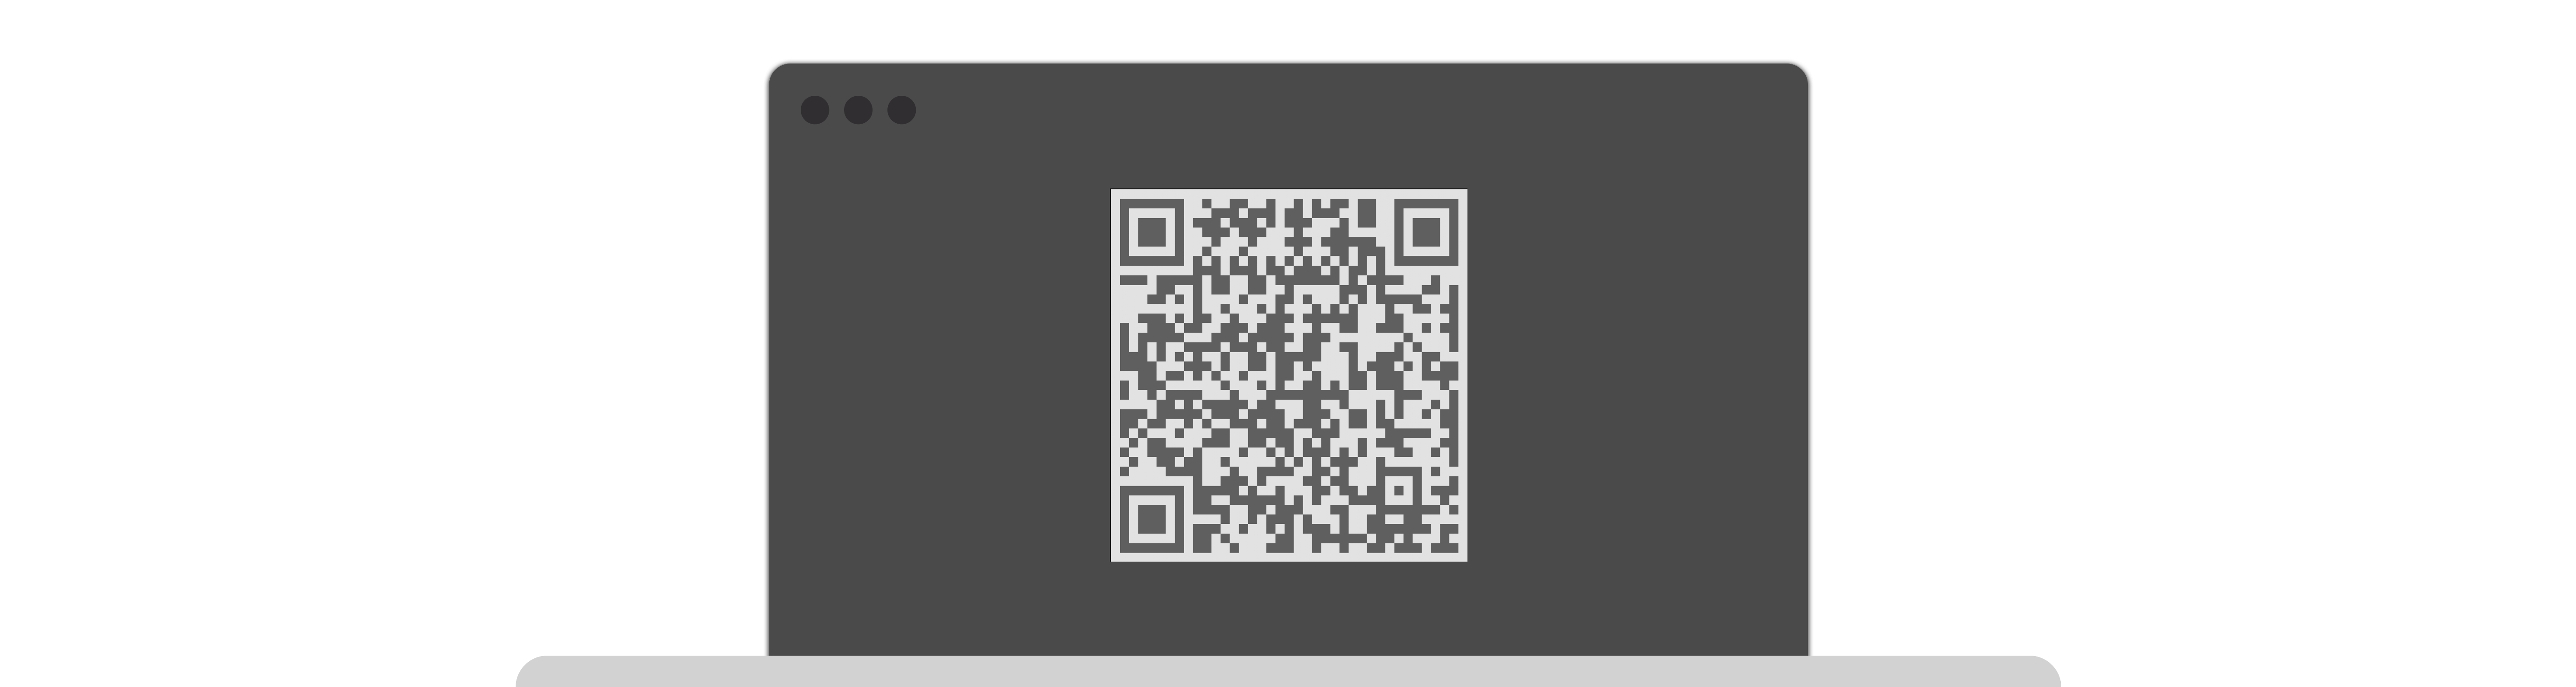 A QR code appears in the terminal, the user scans it with the Krypton app